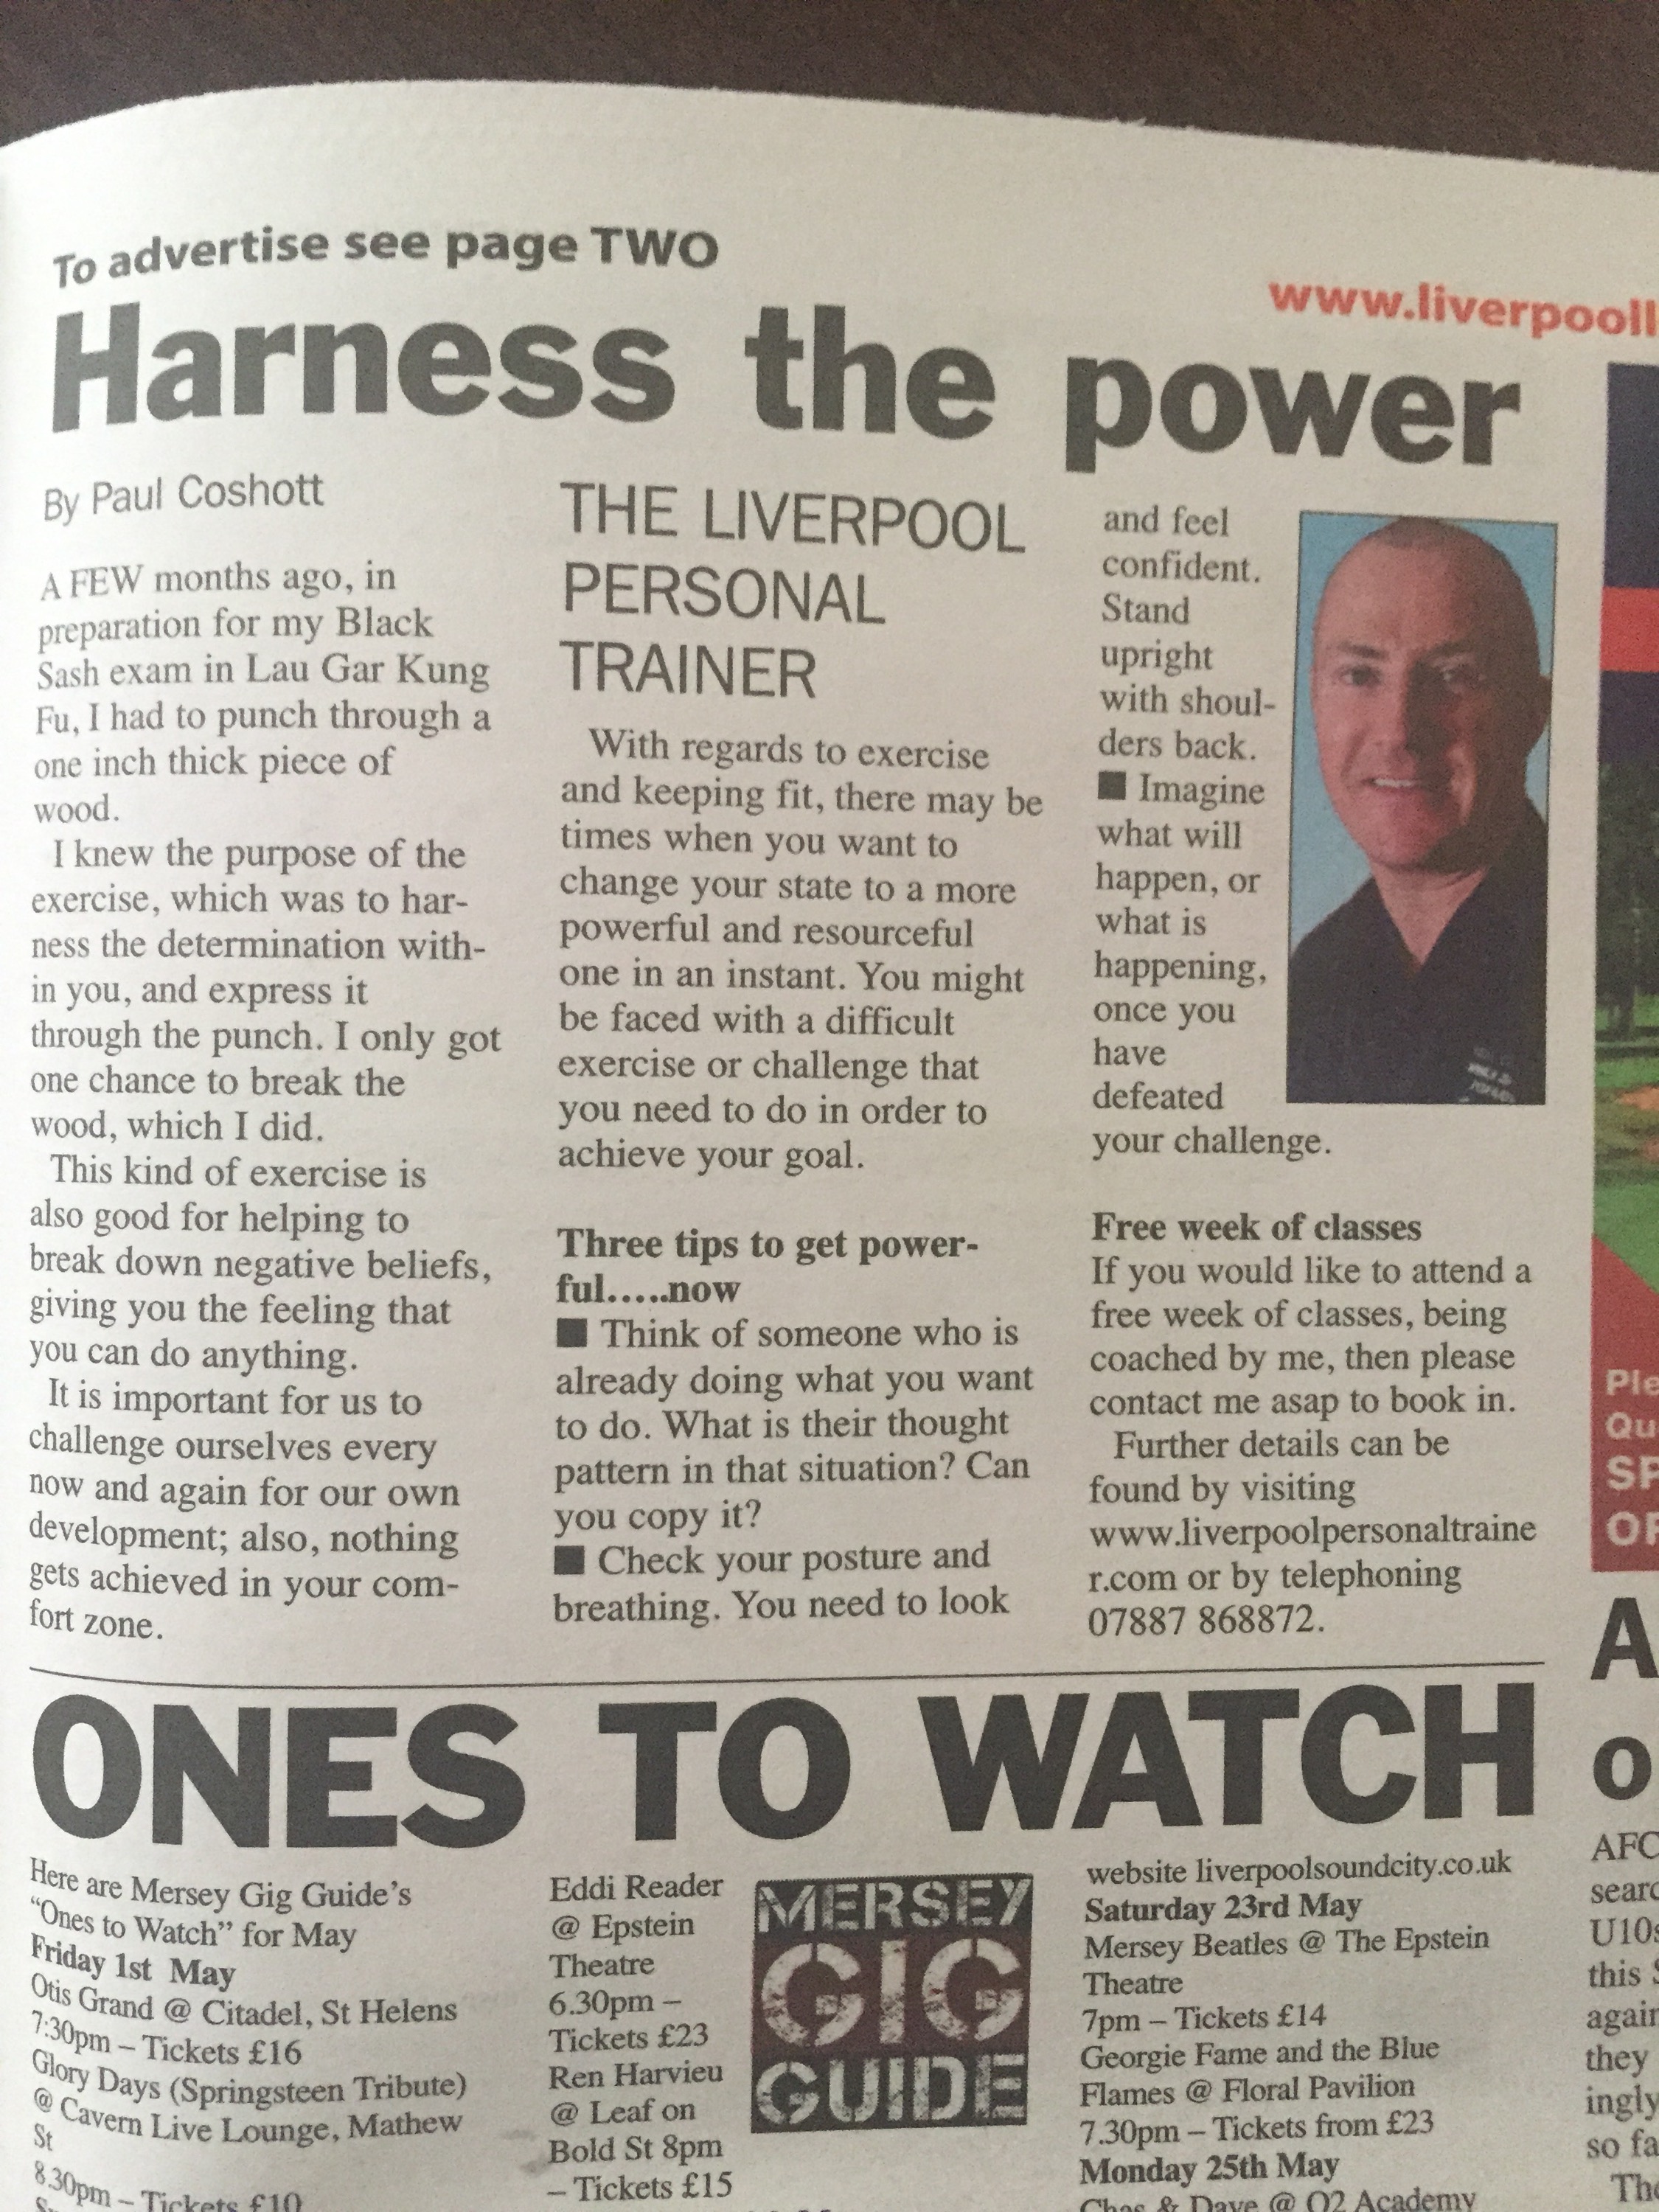 My latest article for the ‘Link’ newspaper, South Liverpool